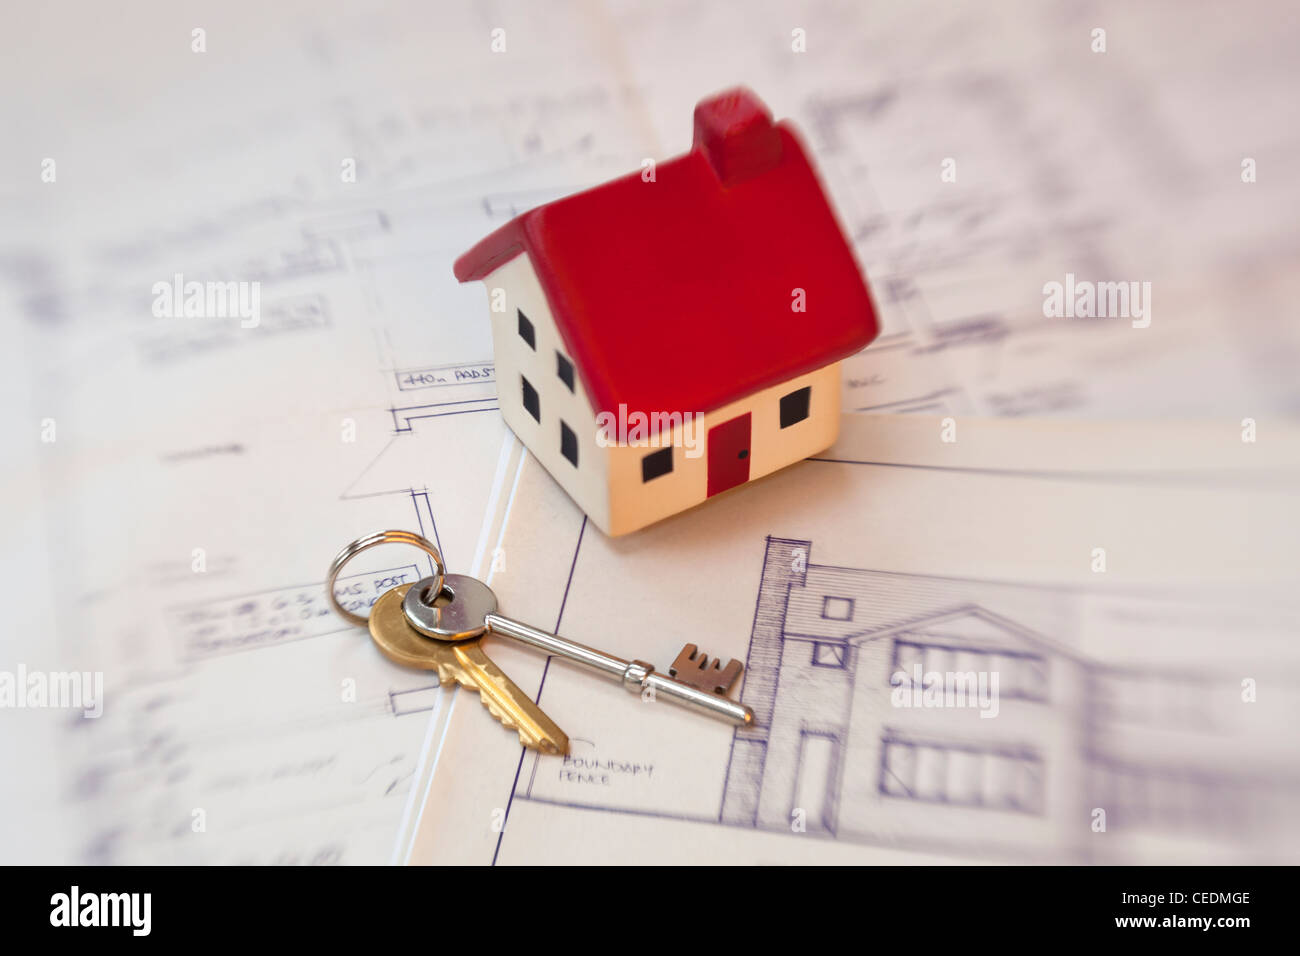 Home with building plans and house keys Stock Photo - Alamy